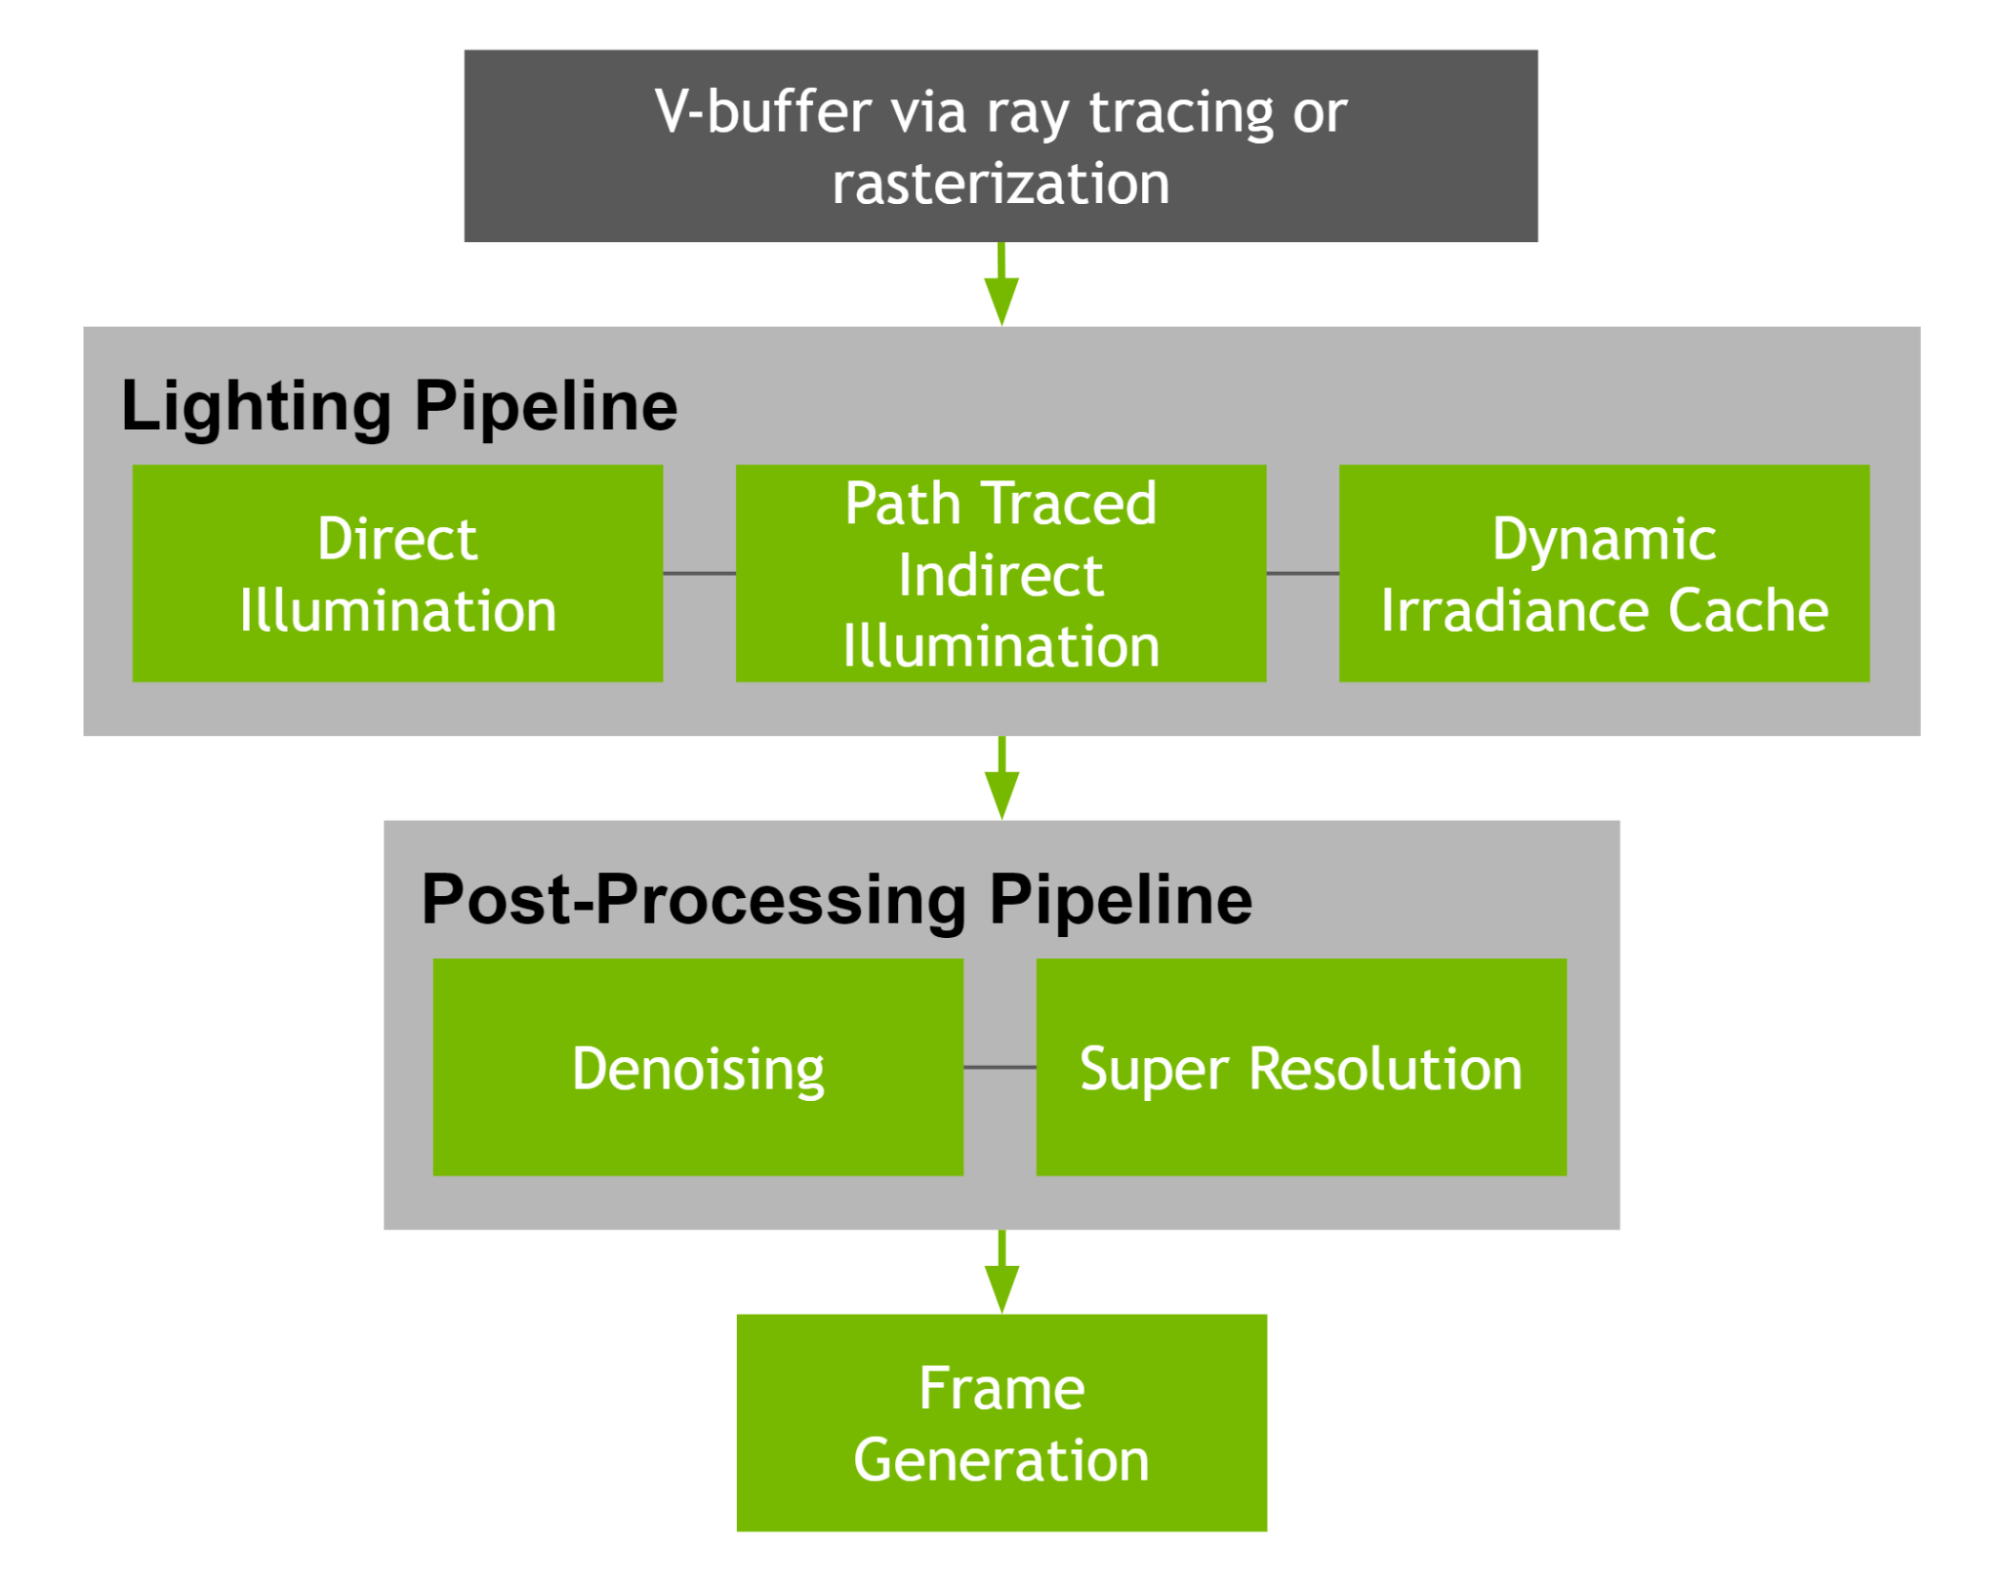 Workflow begins with V-buffer via ray tracing or rasterization, moves to the lighting pipeline with direct or indirect illumination or a dynamic irradiance cache, goes on to the post-processing pipeline with denoising and superresolution, and outputs with frame generation.